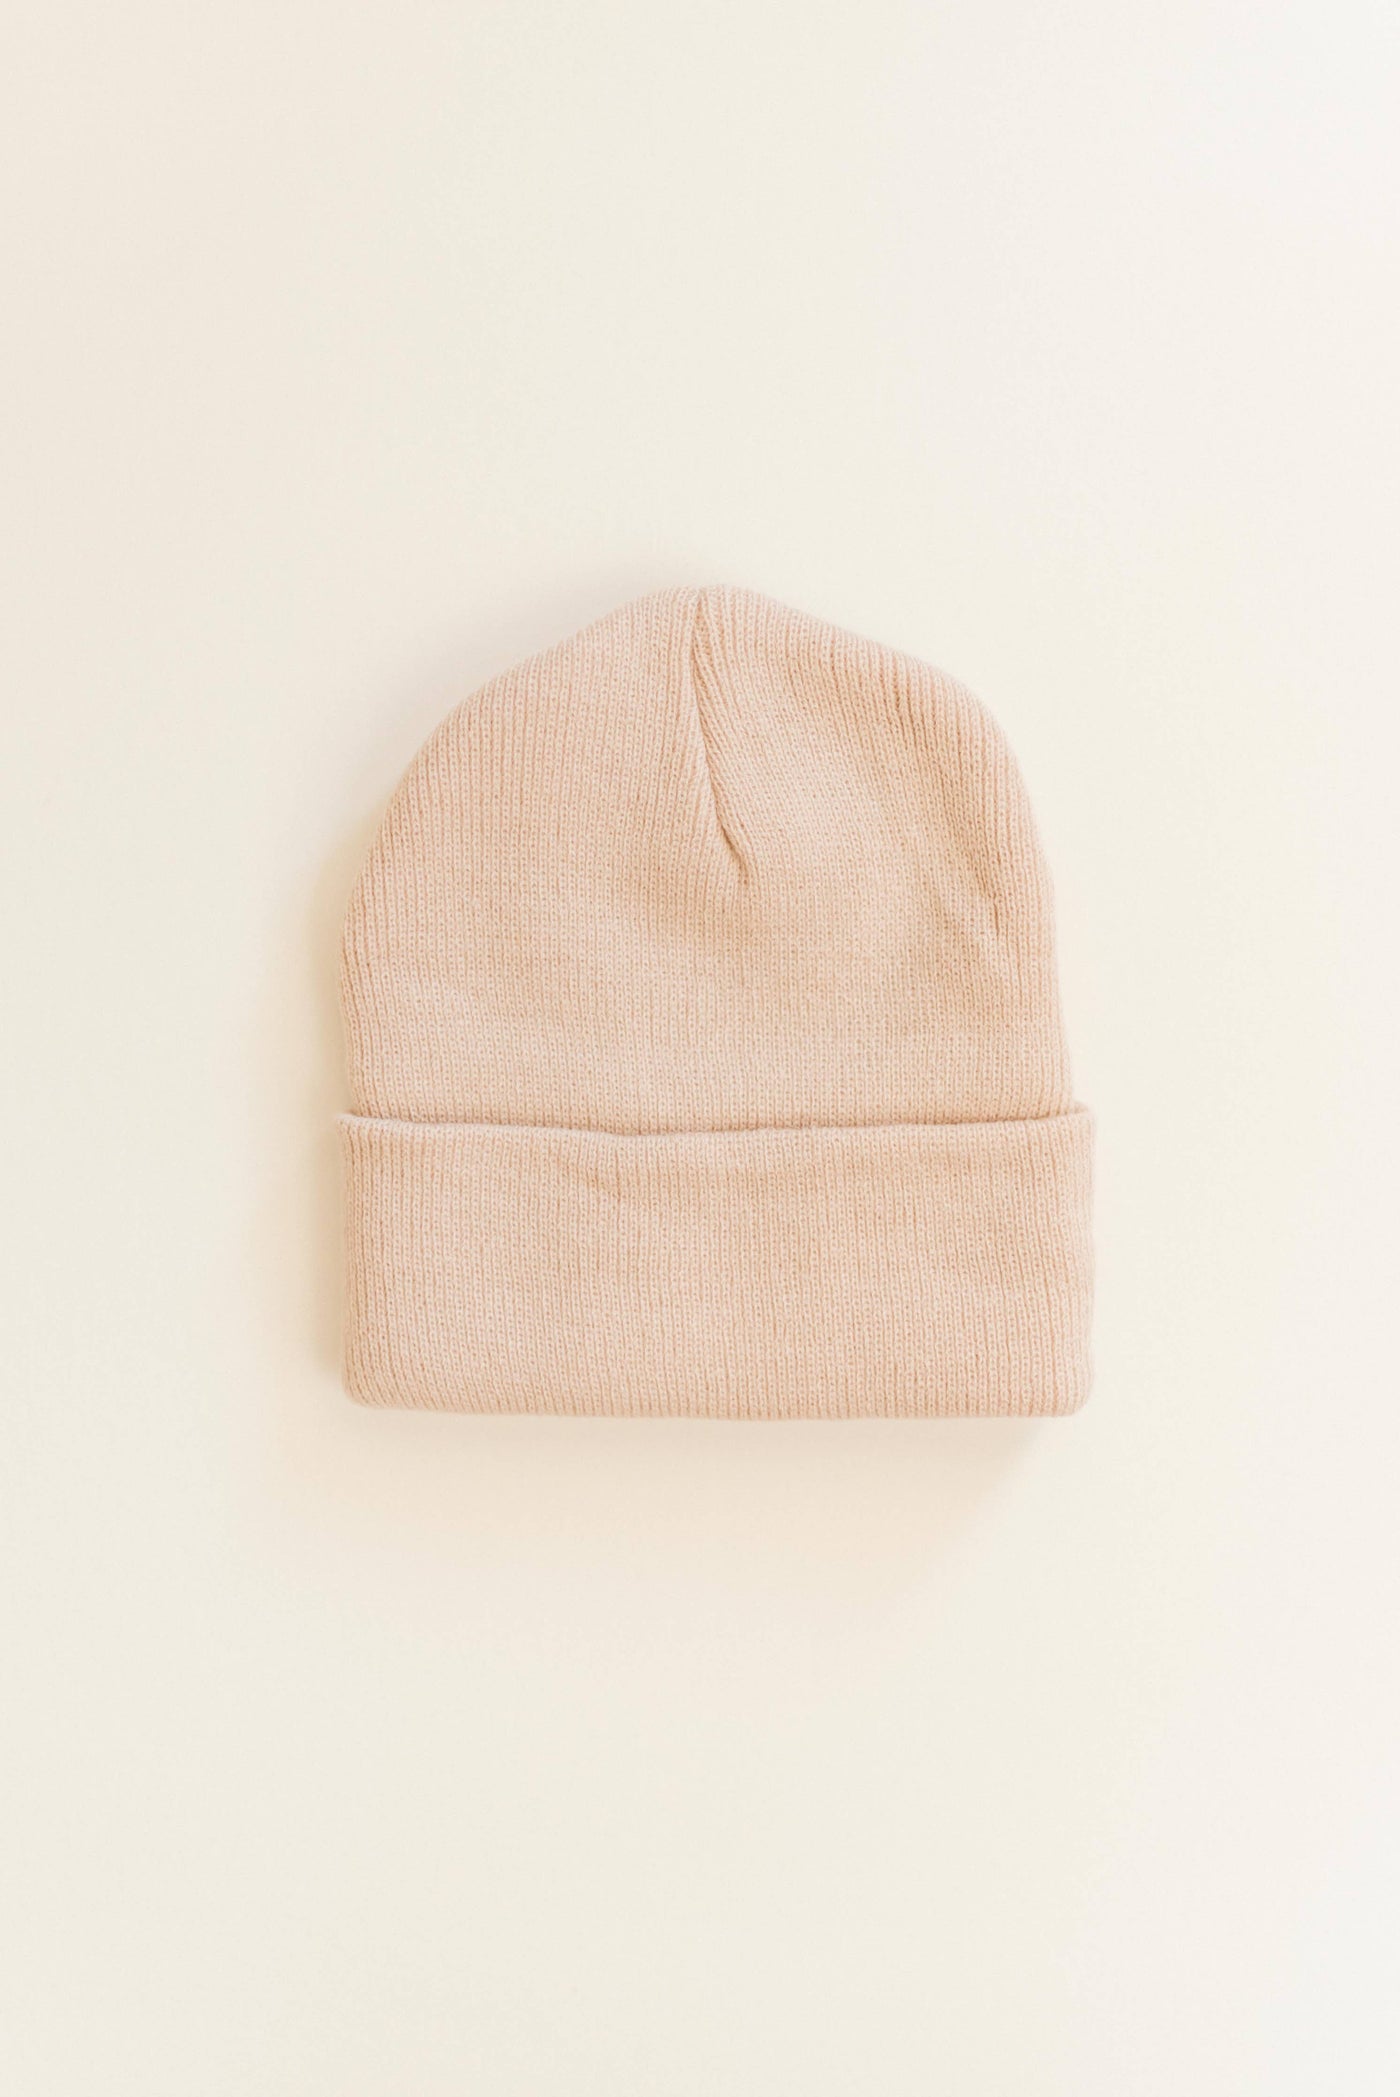 Oversized Knit Baby Beanie  0-24 months